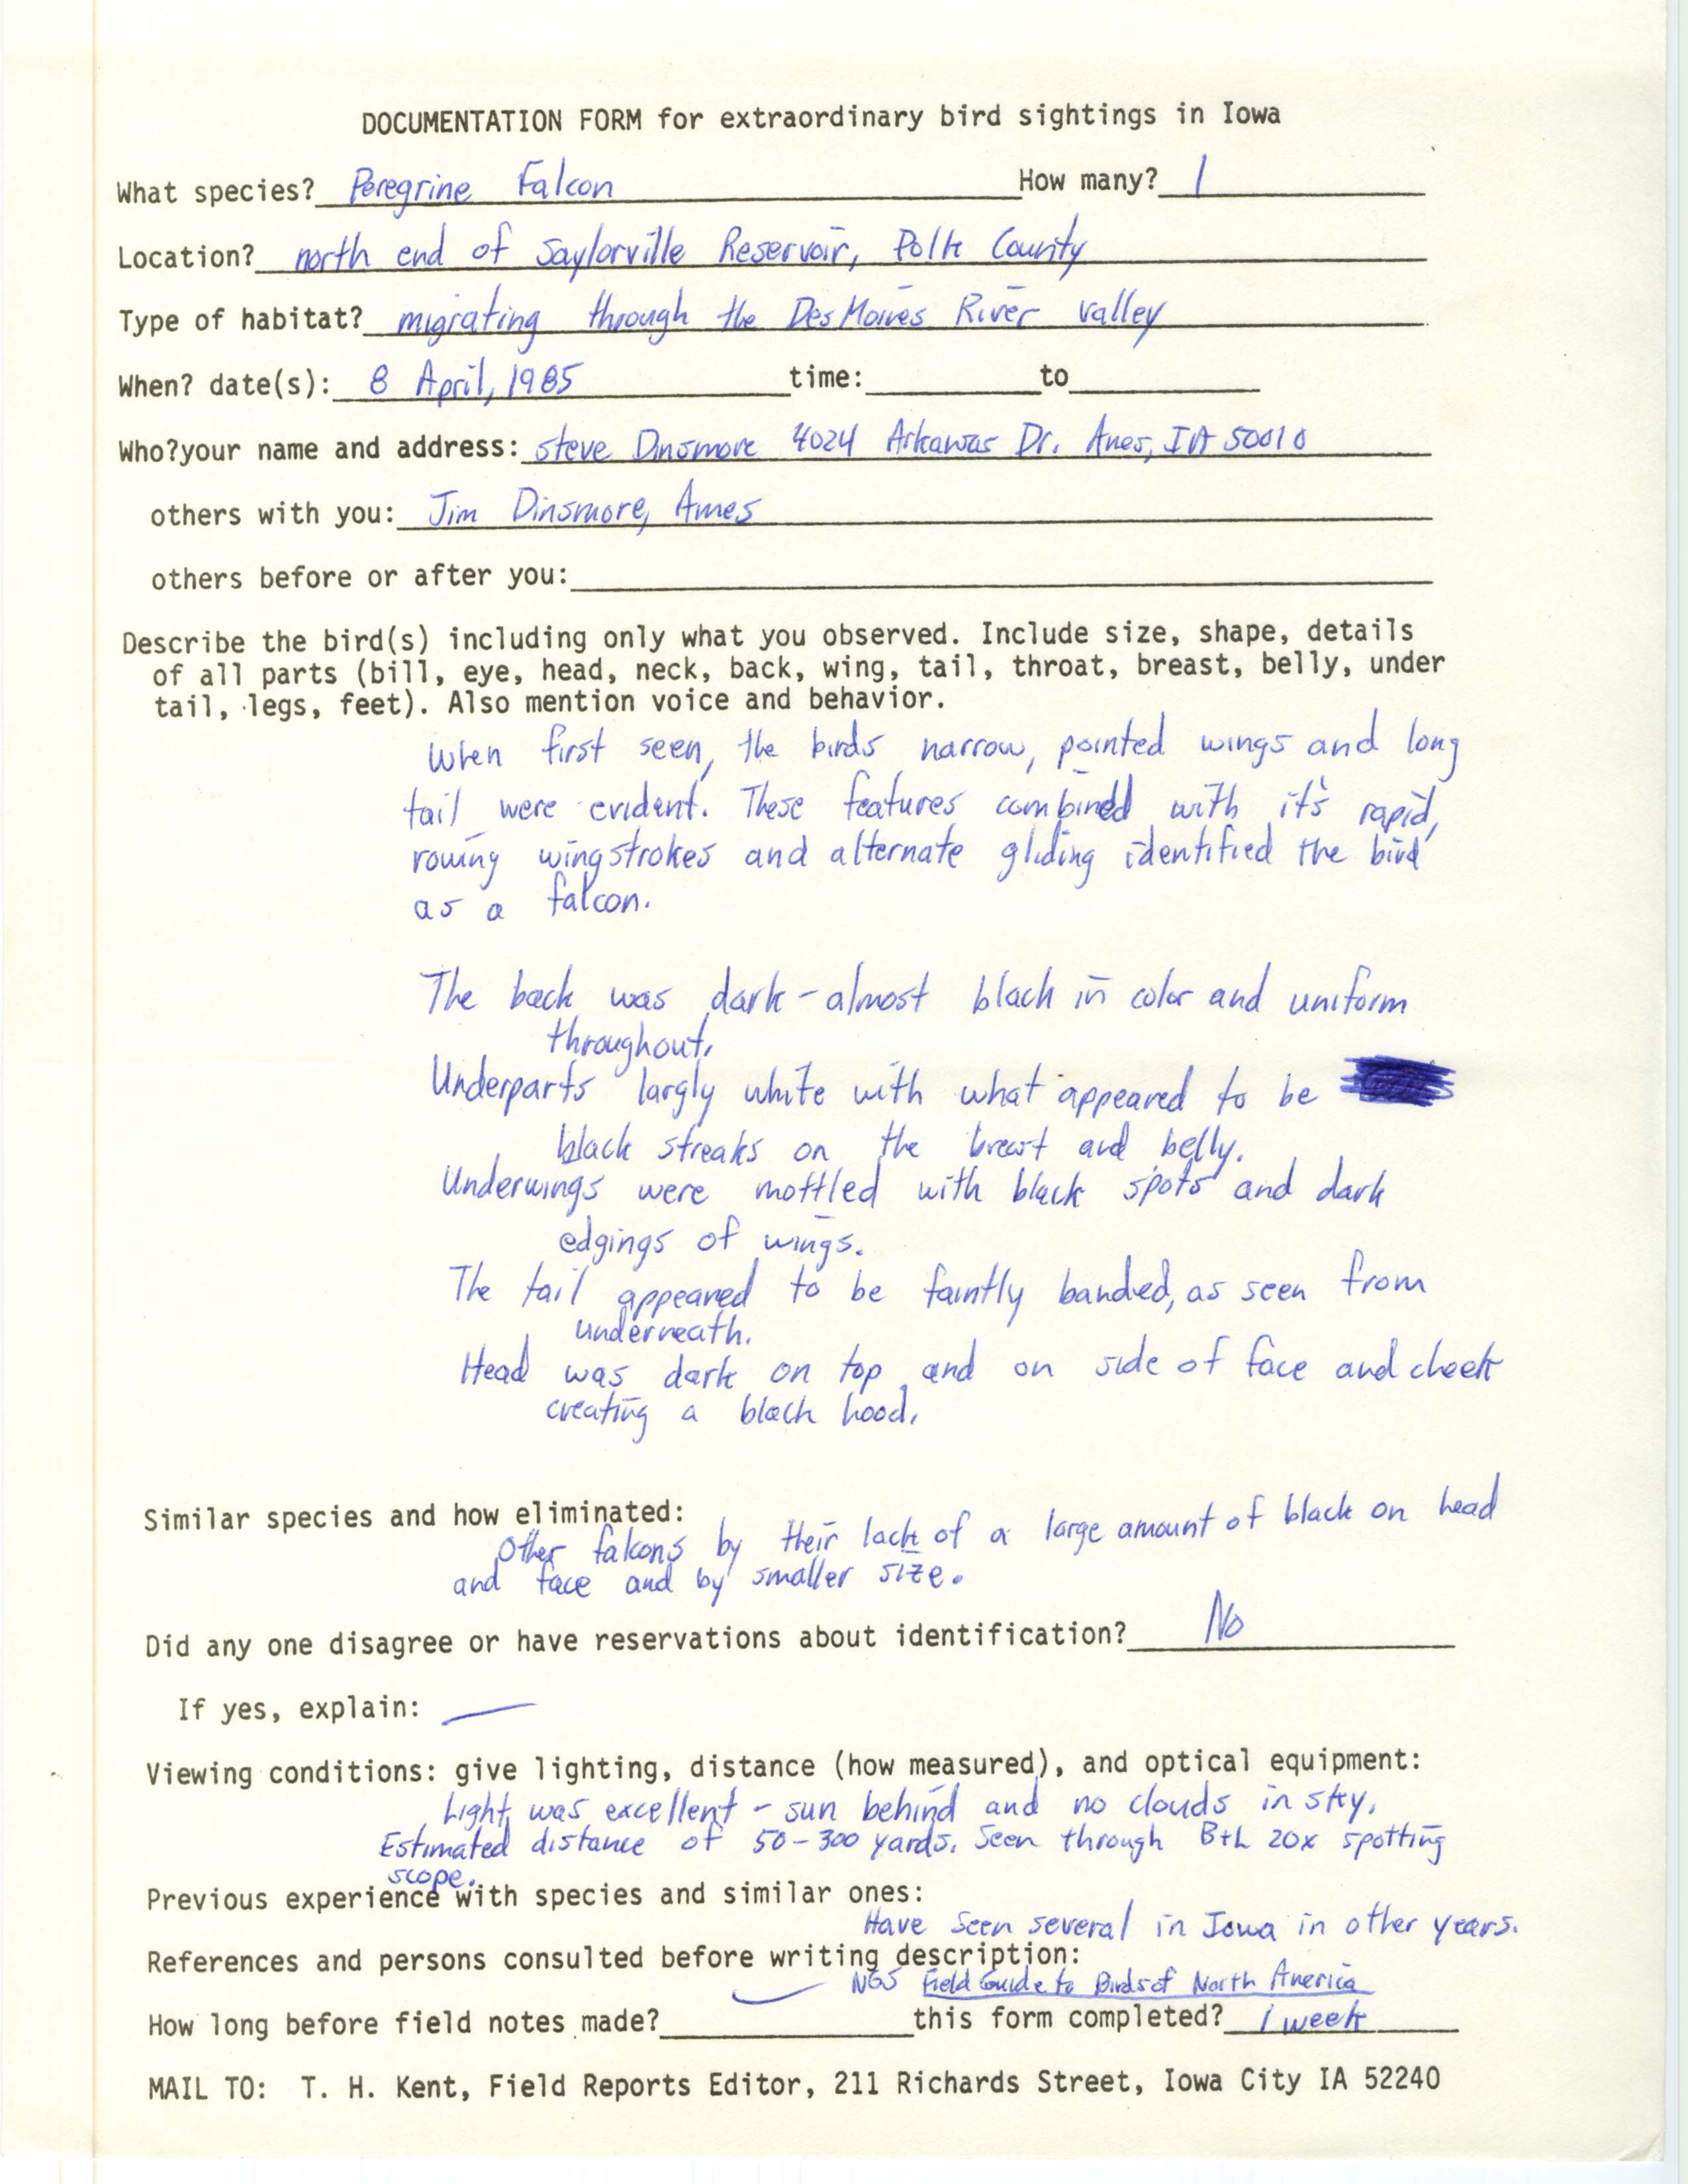 Rare bird documentation form for Peregrine Falcon at the north end of Saylorville Reservoir, 1985